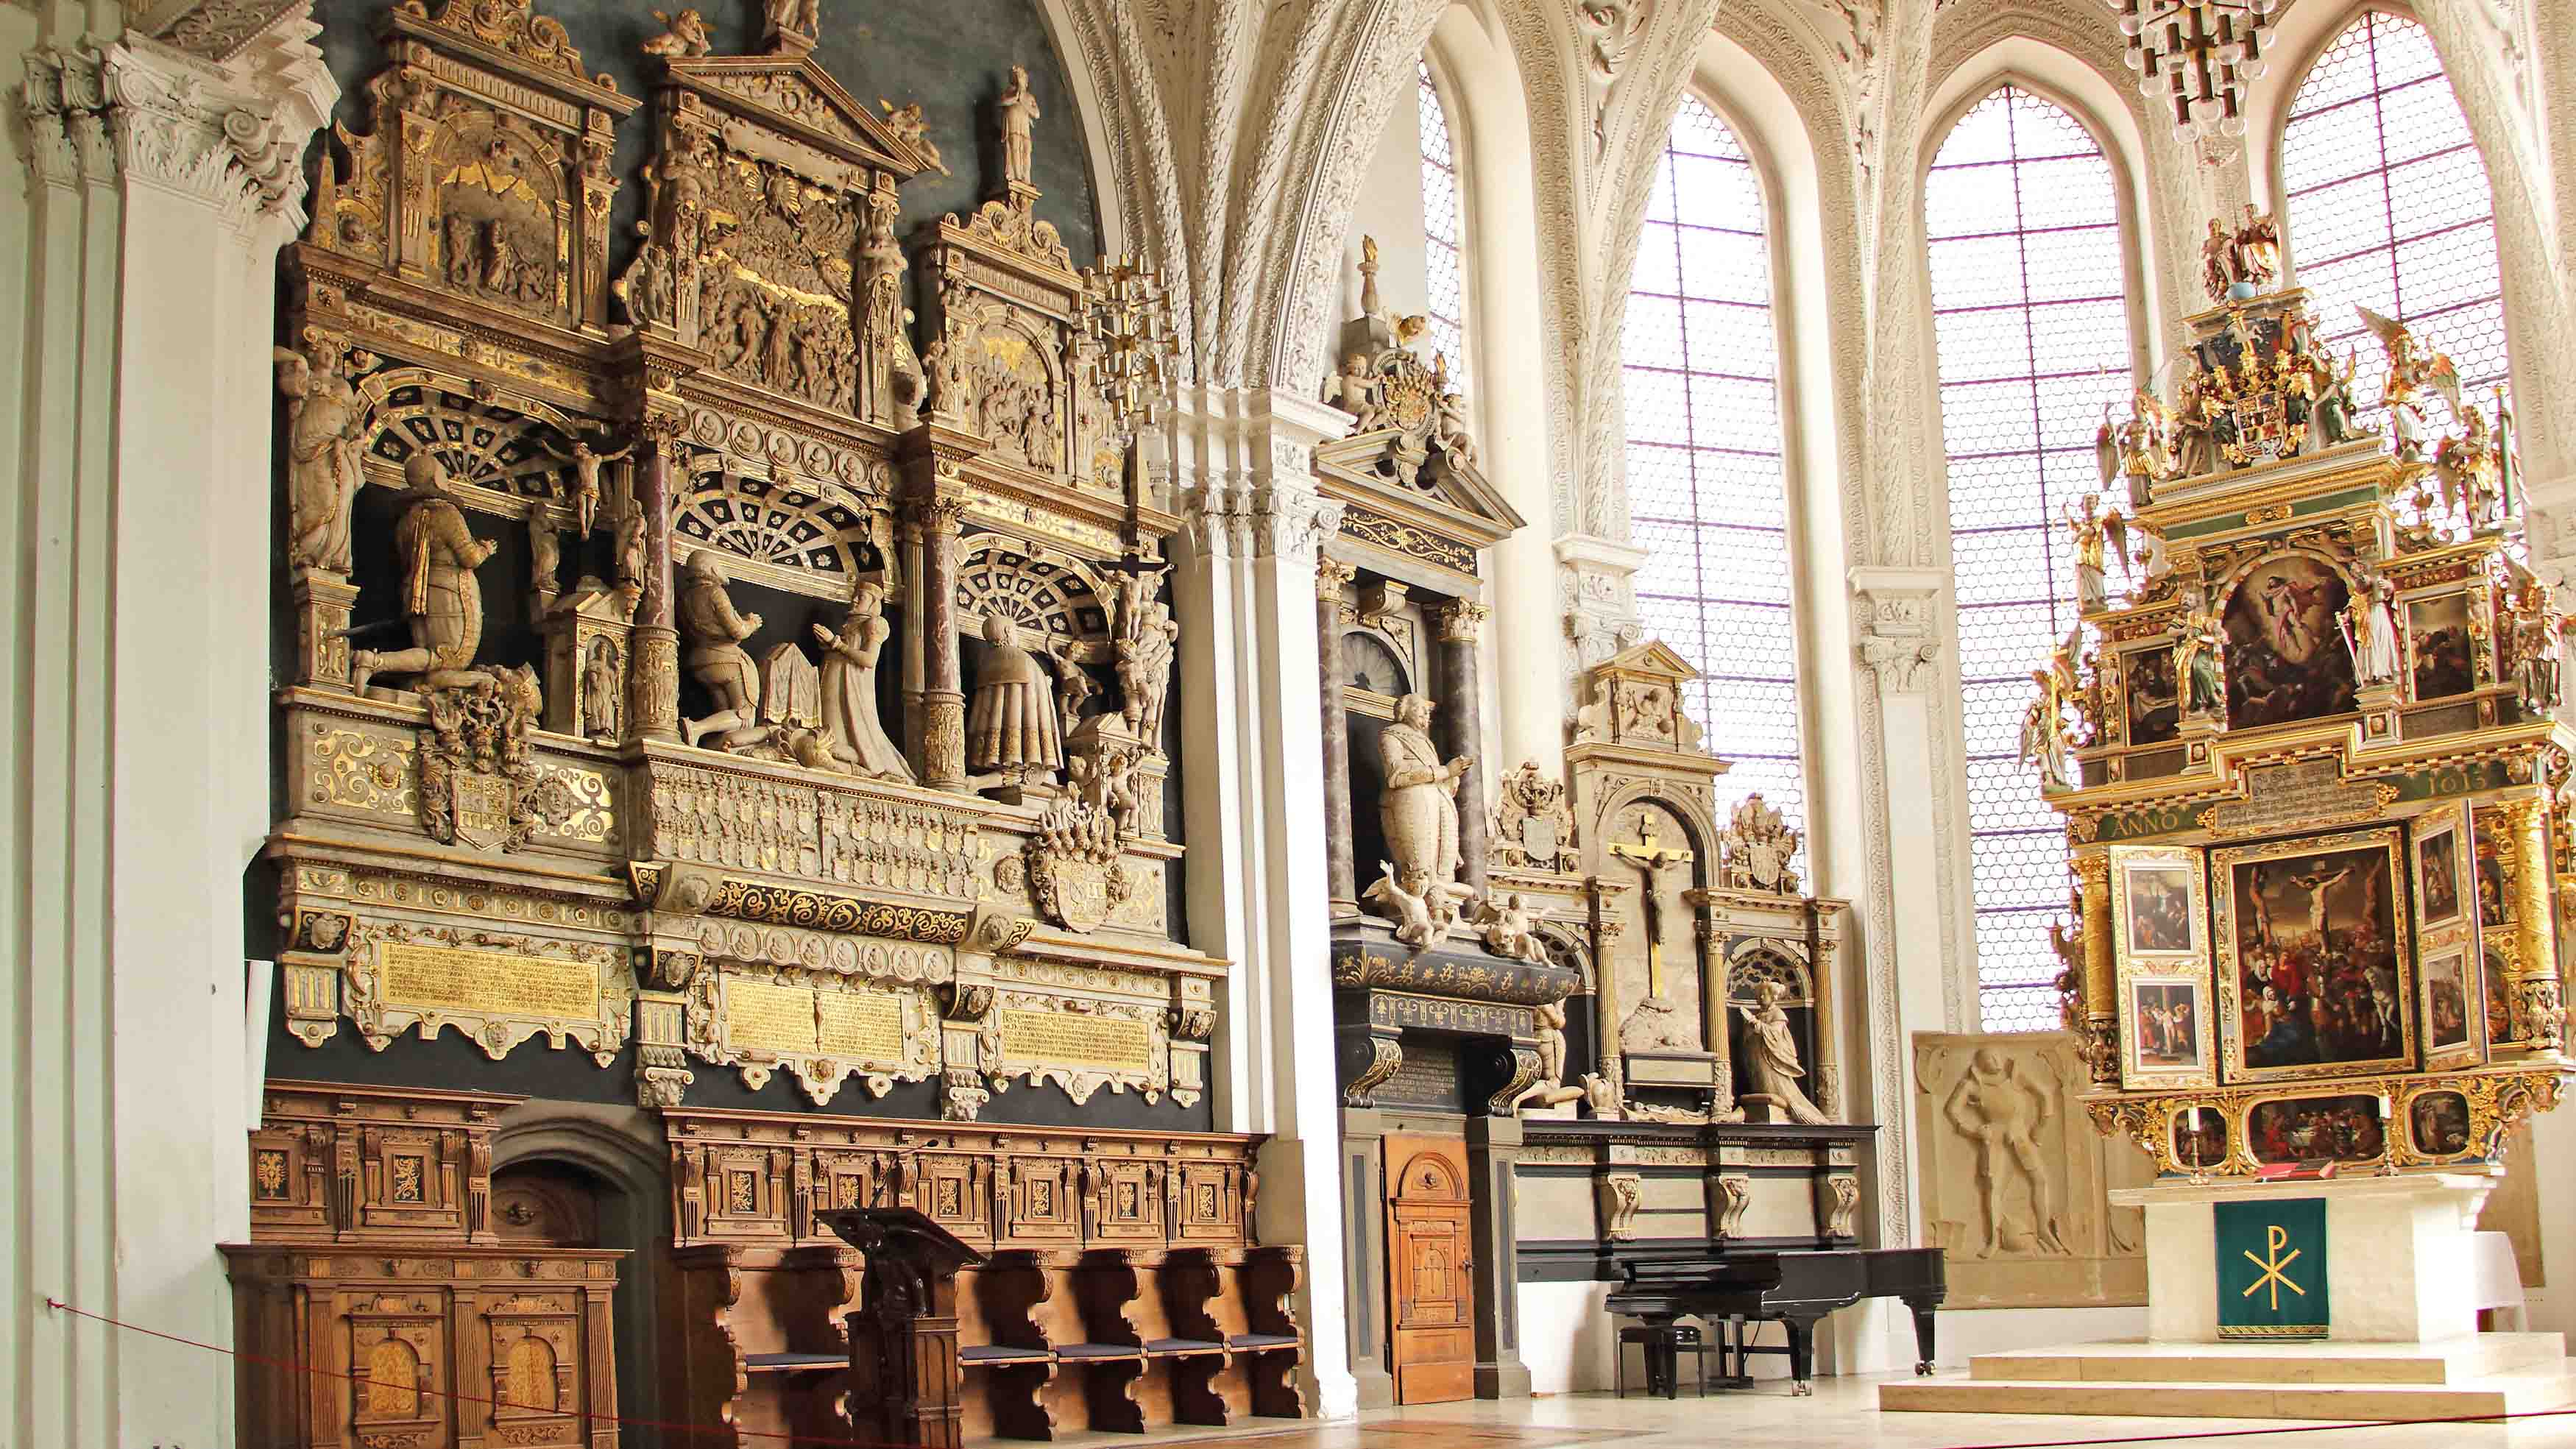 Altar of the Celle town church